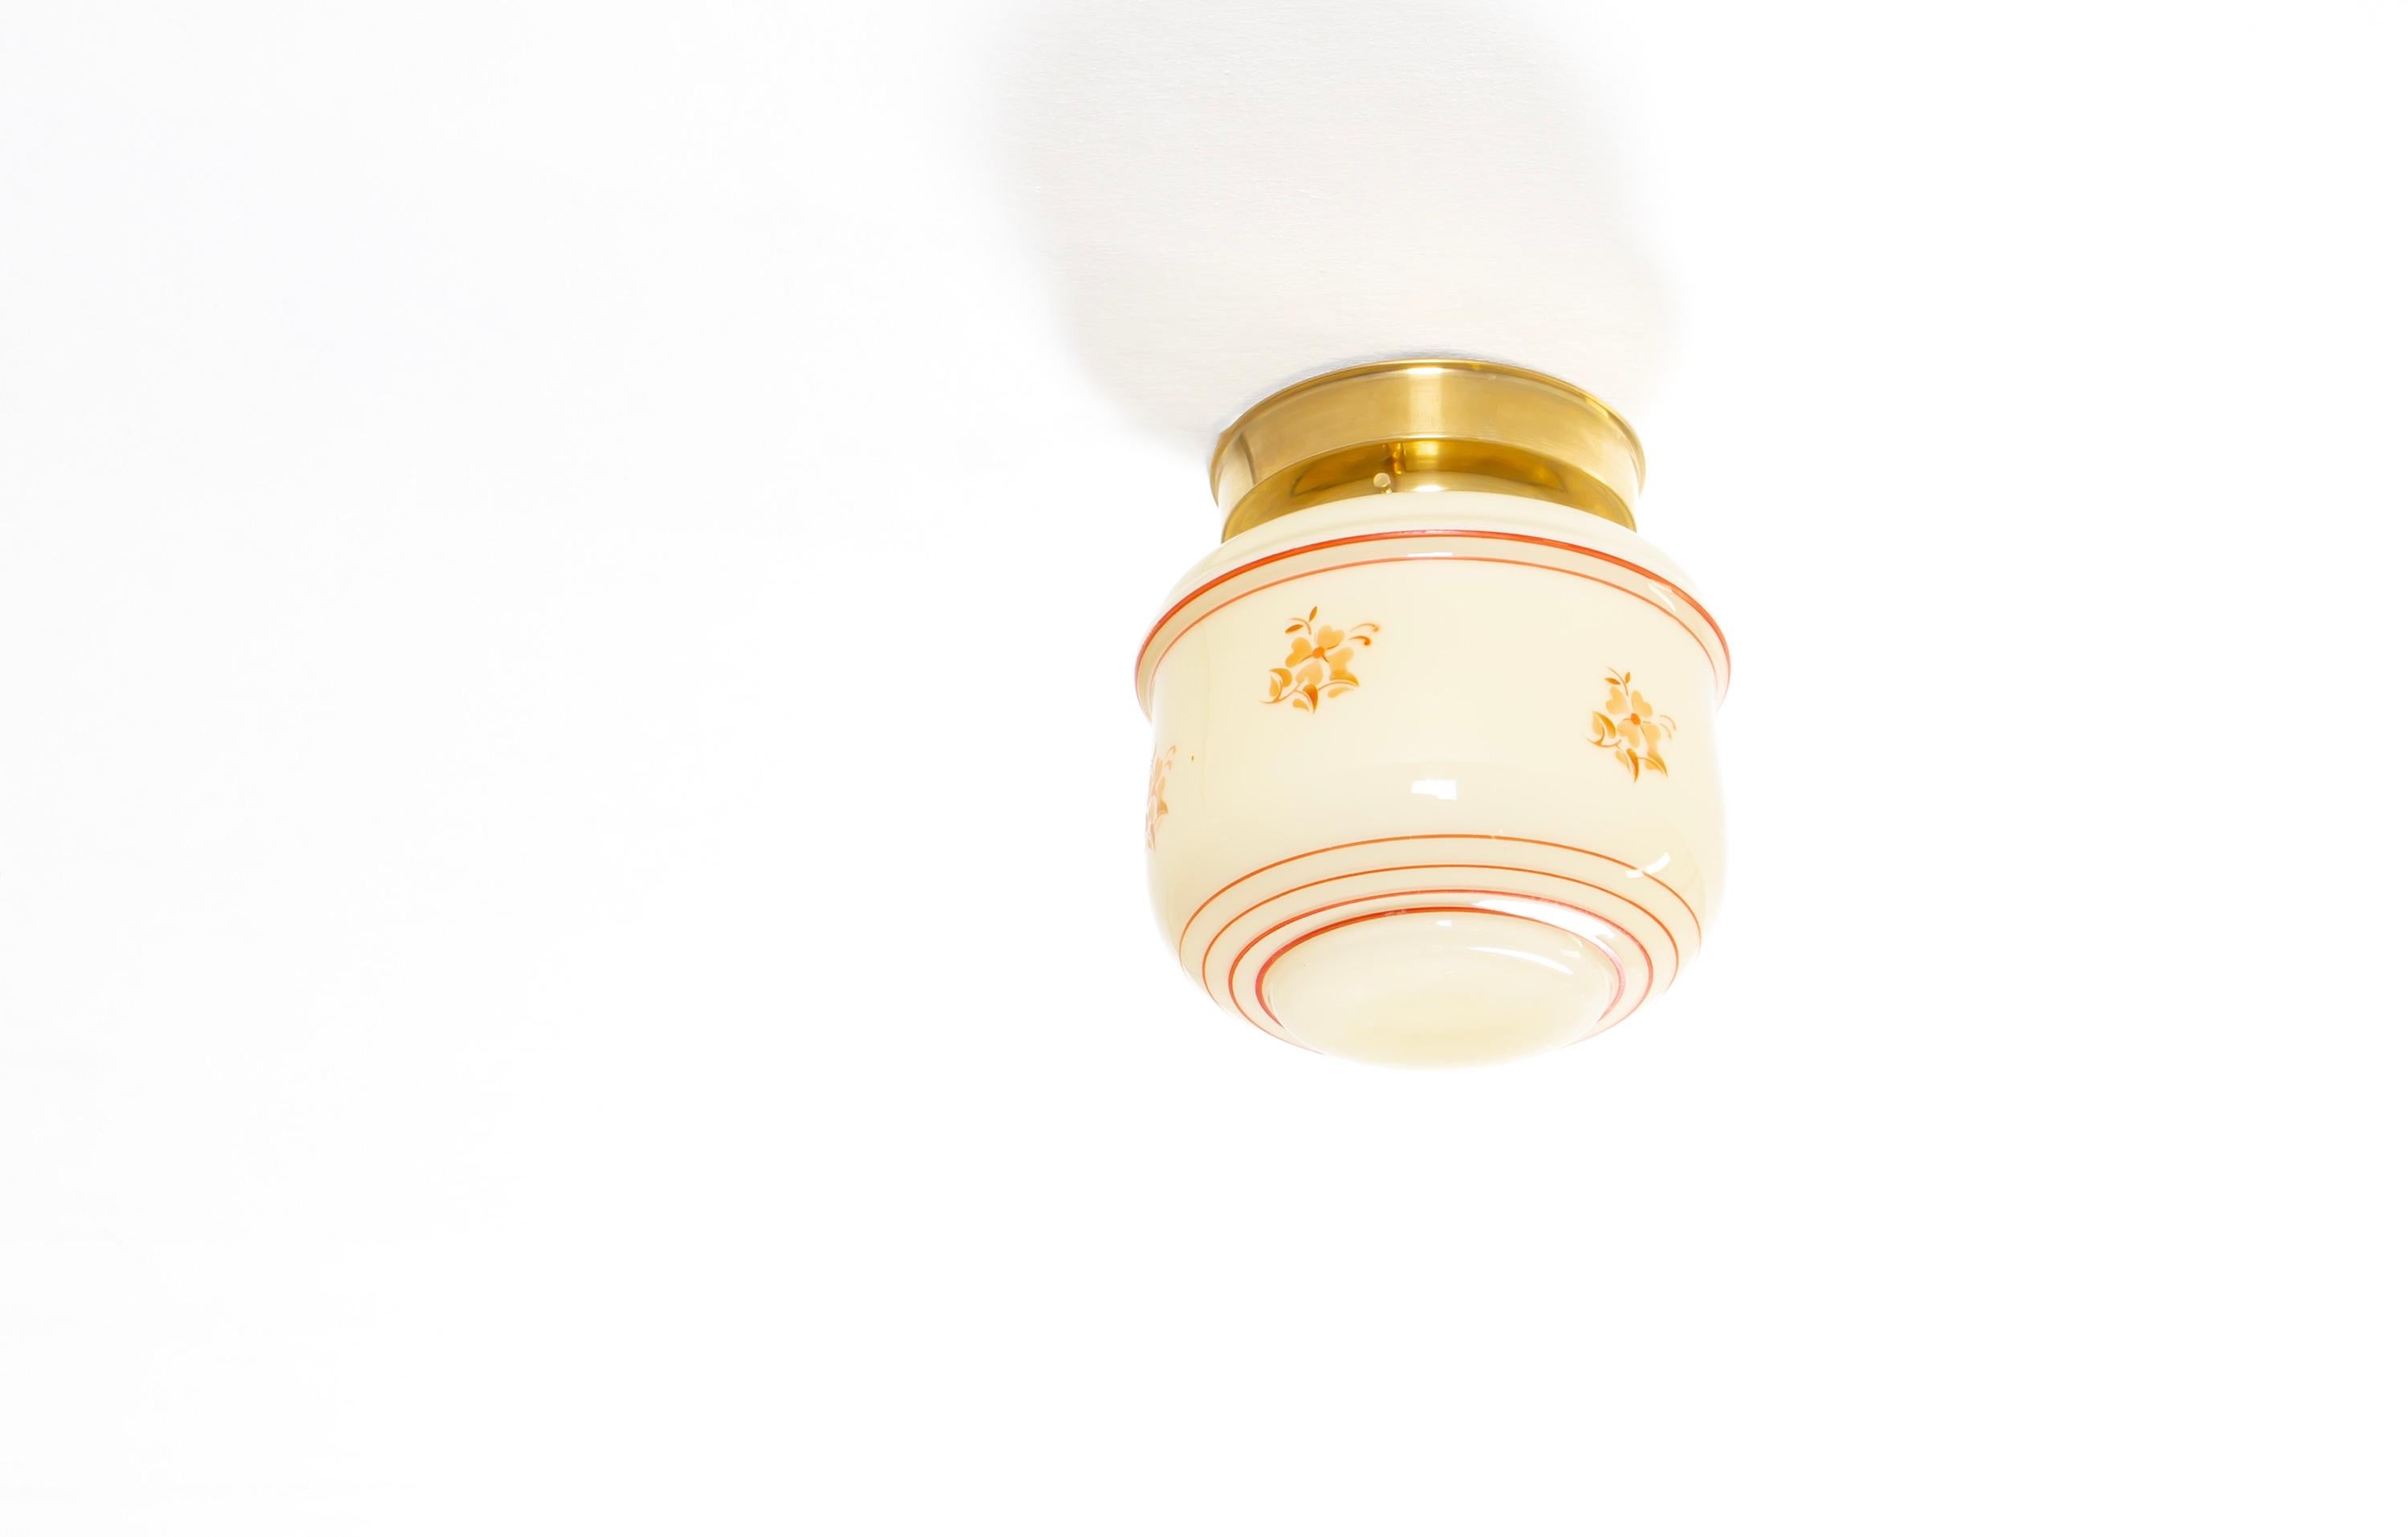 Decorative ceiling light with hand-decorated glass shade and brass metal base. Designed and made in Norway from circa 1950s first half. The lamp is fully working and in good vintage condition. It is fitted with one E27 bulb holder (works in the US)